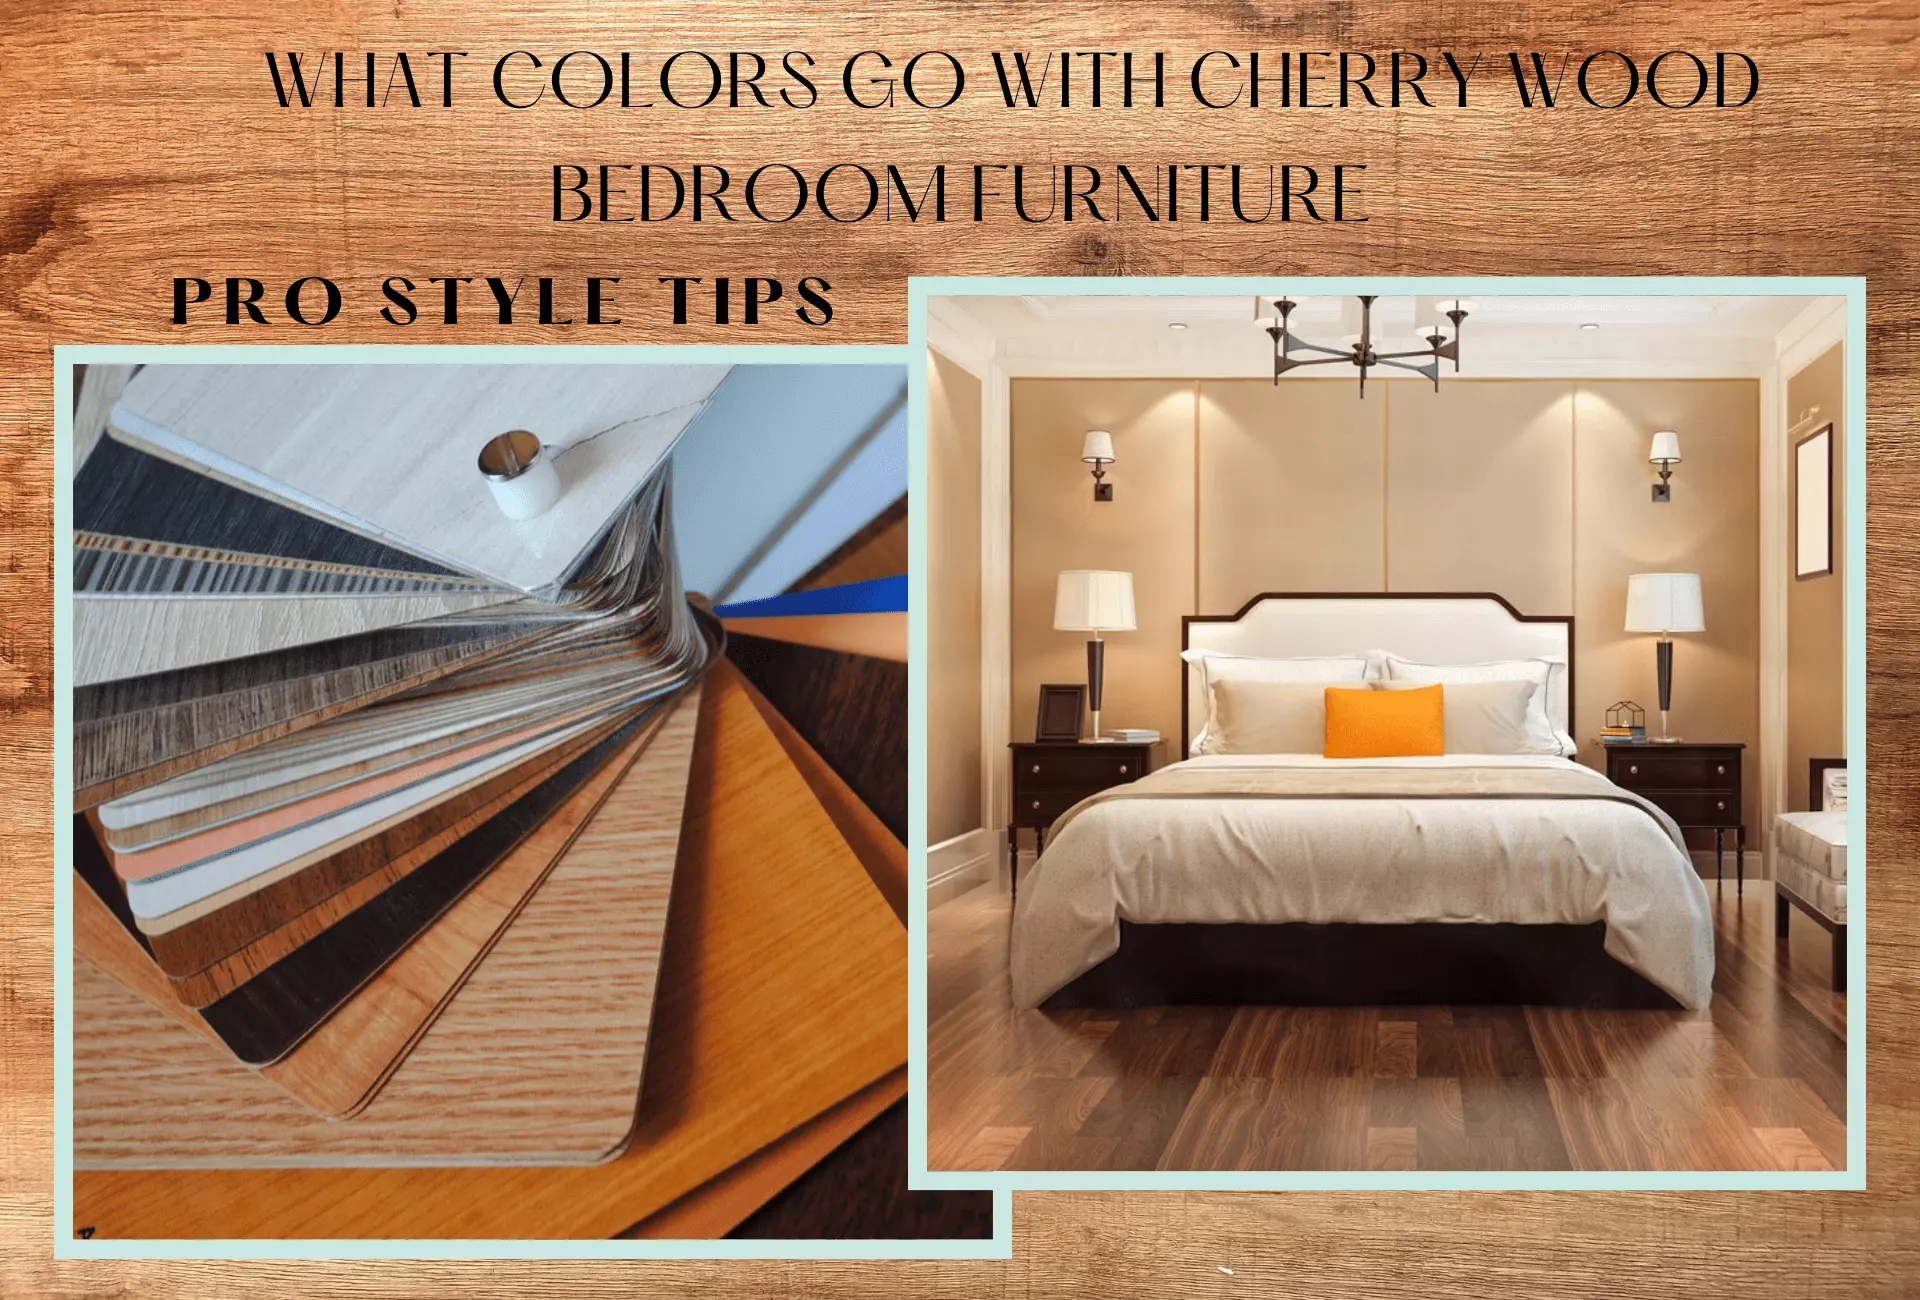 What Colors go with Cherry Wood Bedroom Furniture